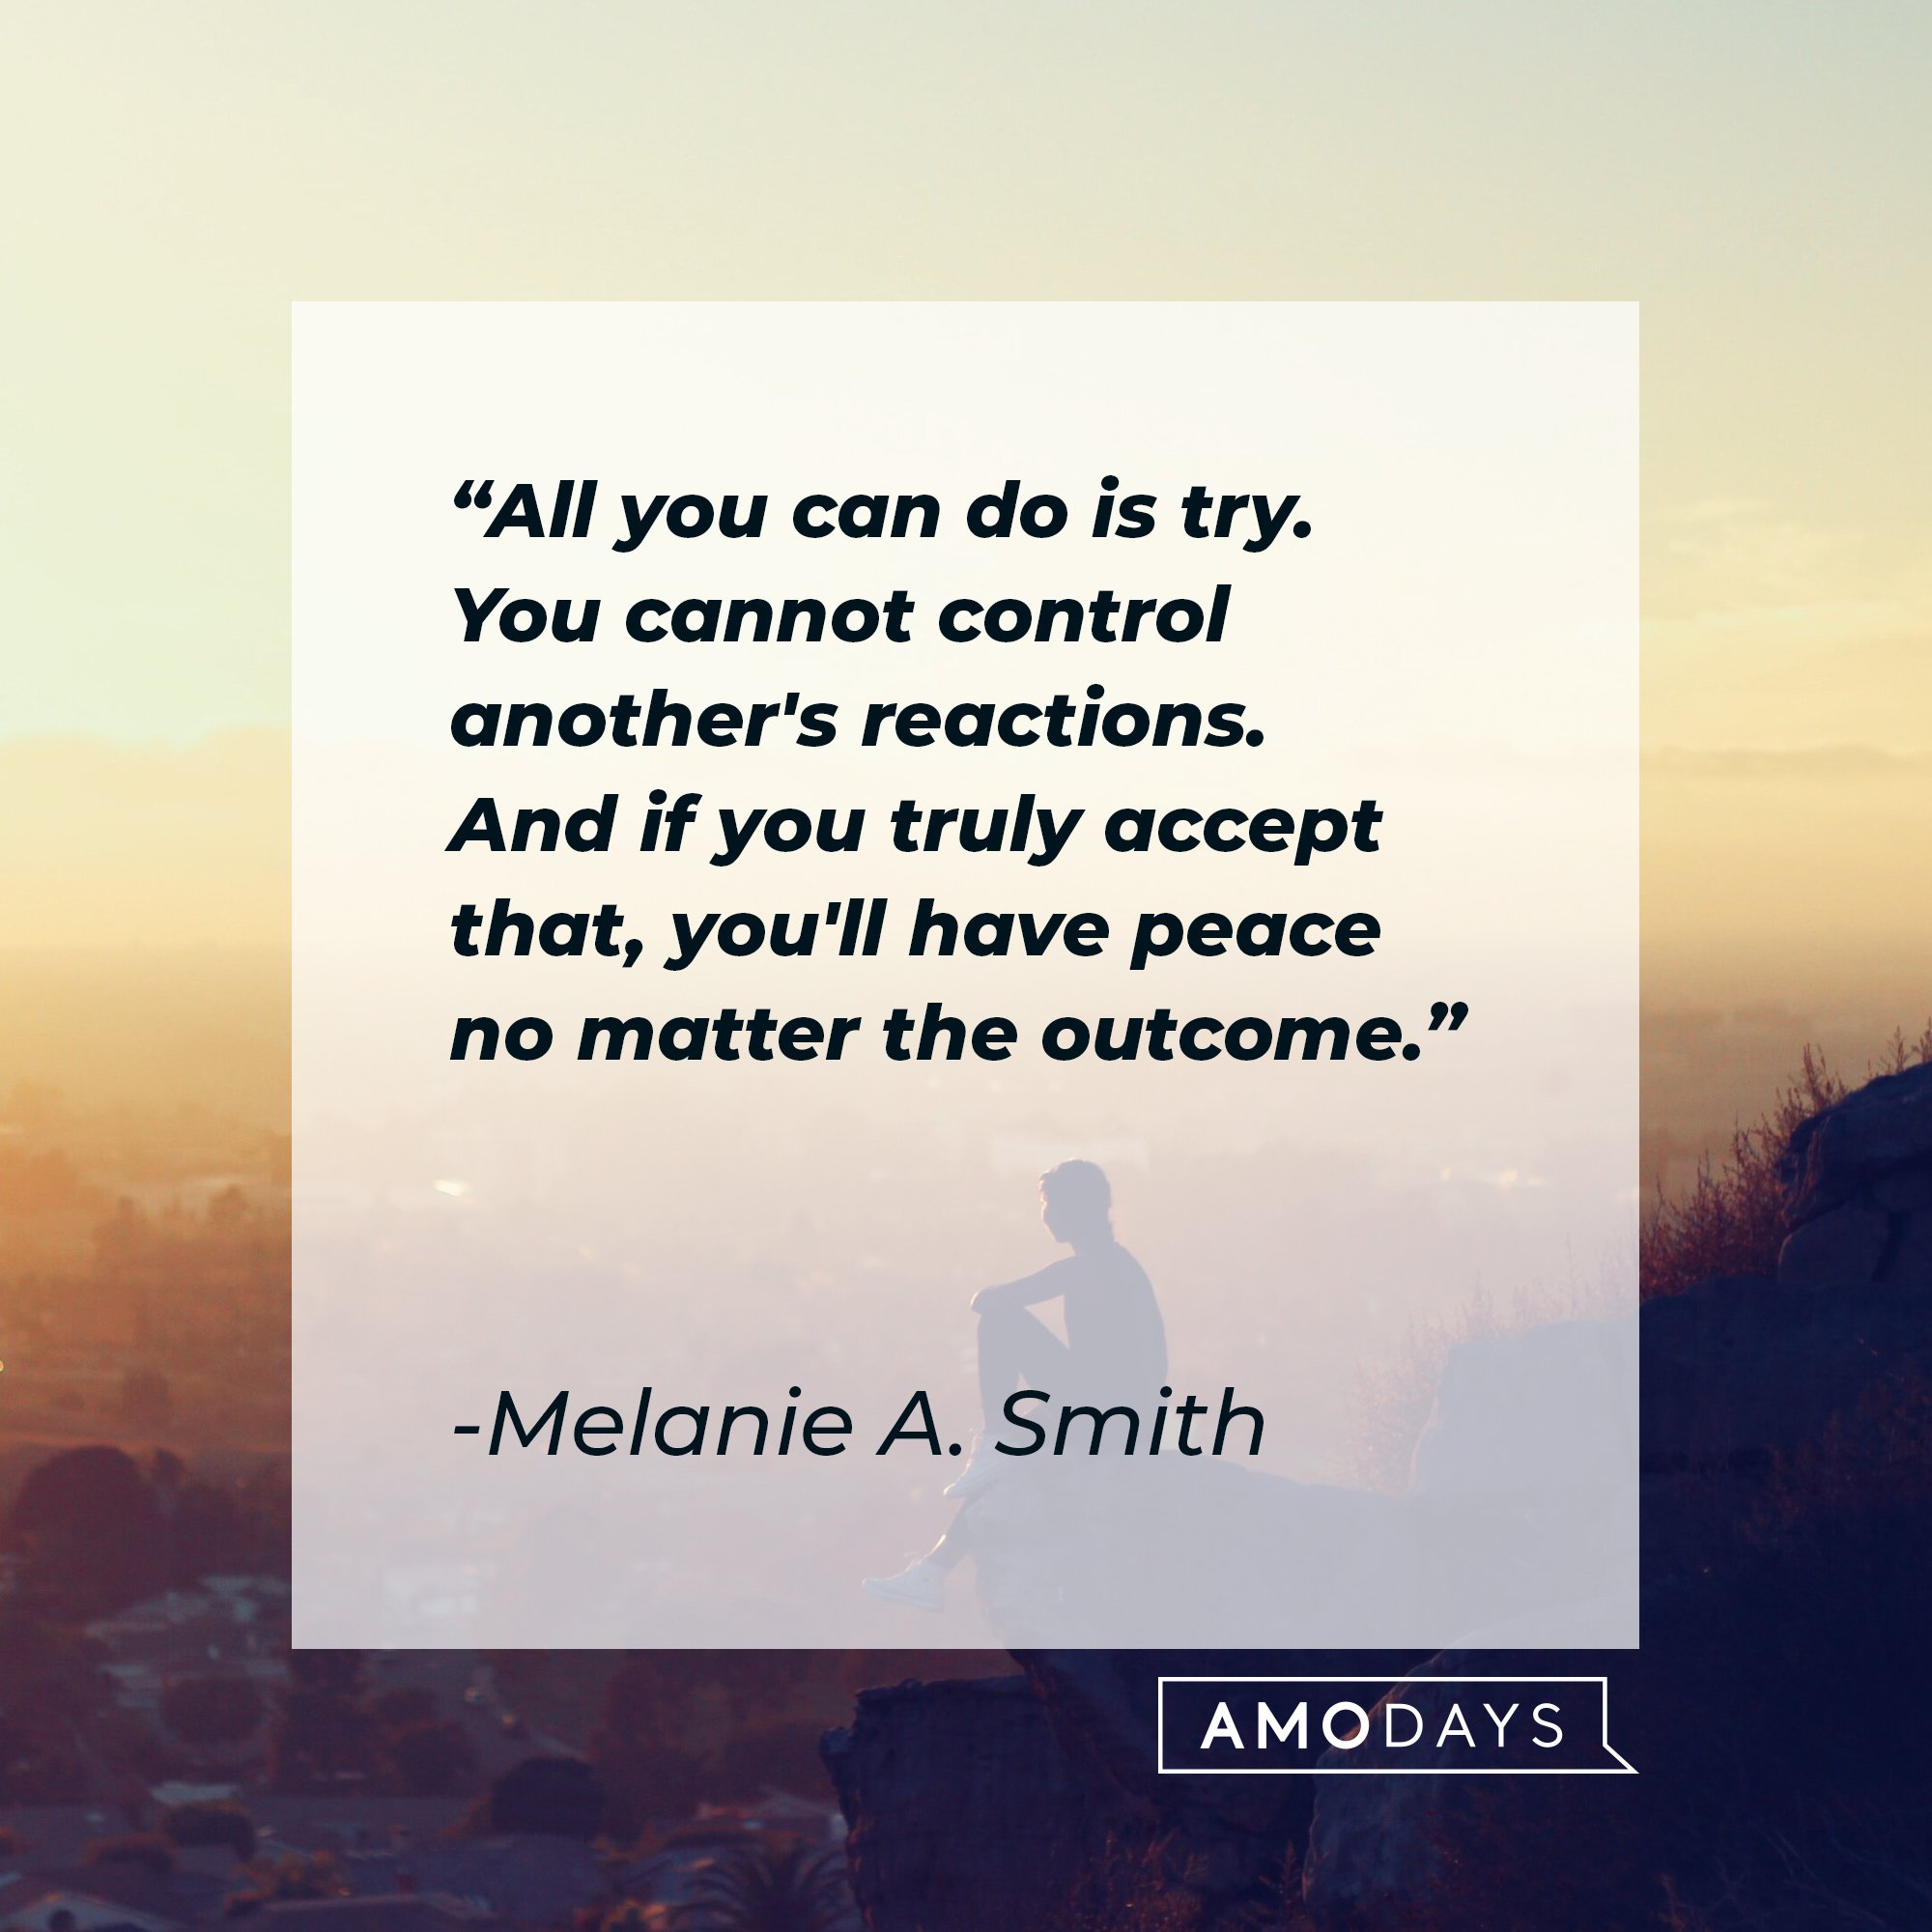 Melanie A. Smith's quote: "All you can do is try. You cannot control another's reactions. And if you truly accept that, you'll have peace no matter the outcome." | Image: AmoDays